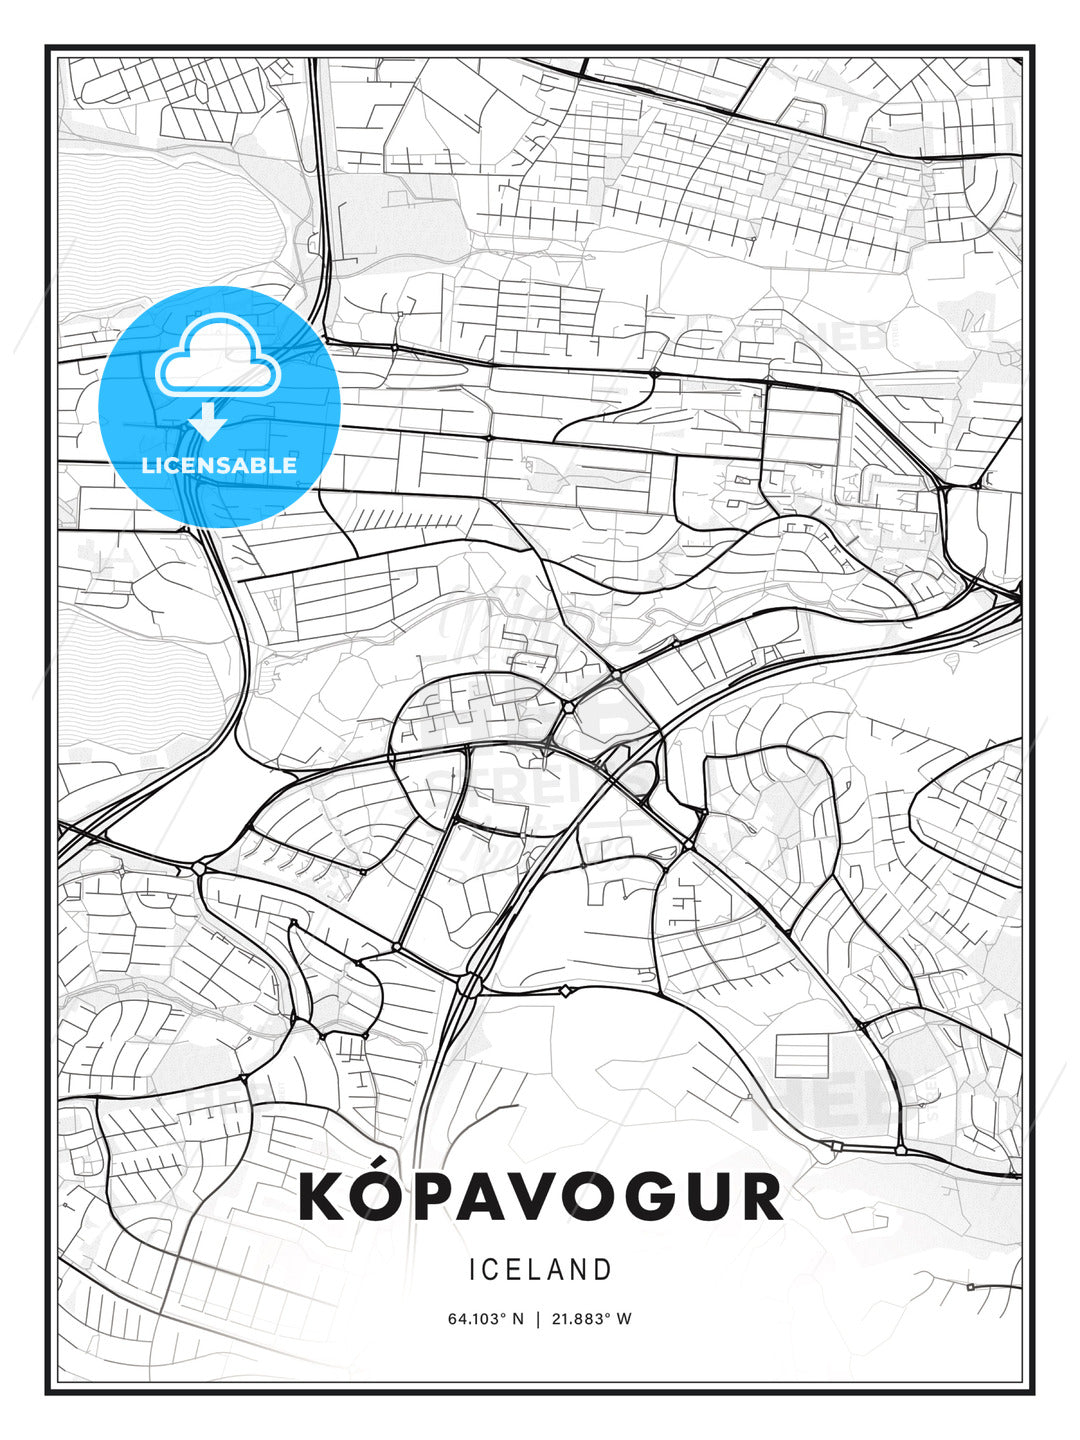 Kópavogur, Iceland, Modern Print Template in Various Formats - HEBSTREITS Sketches